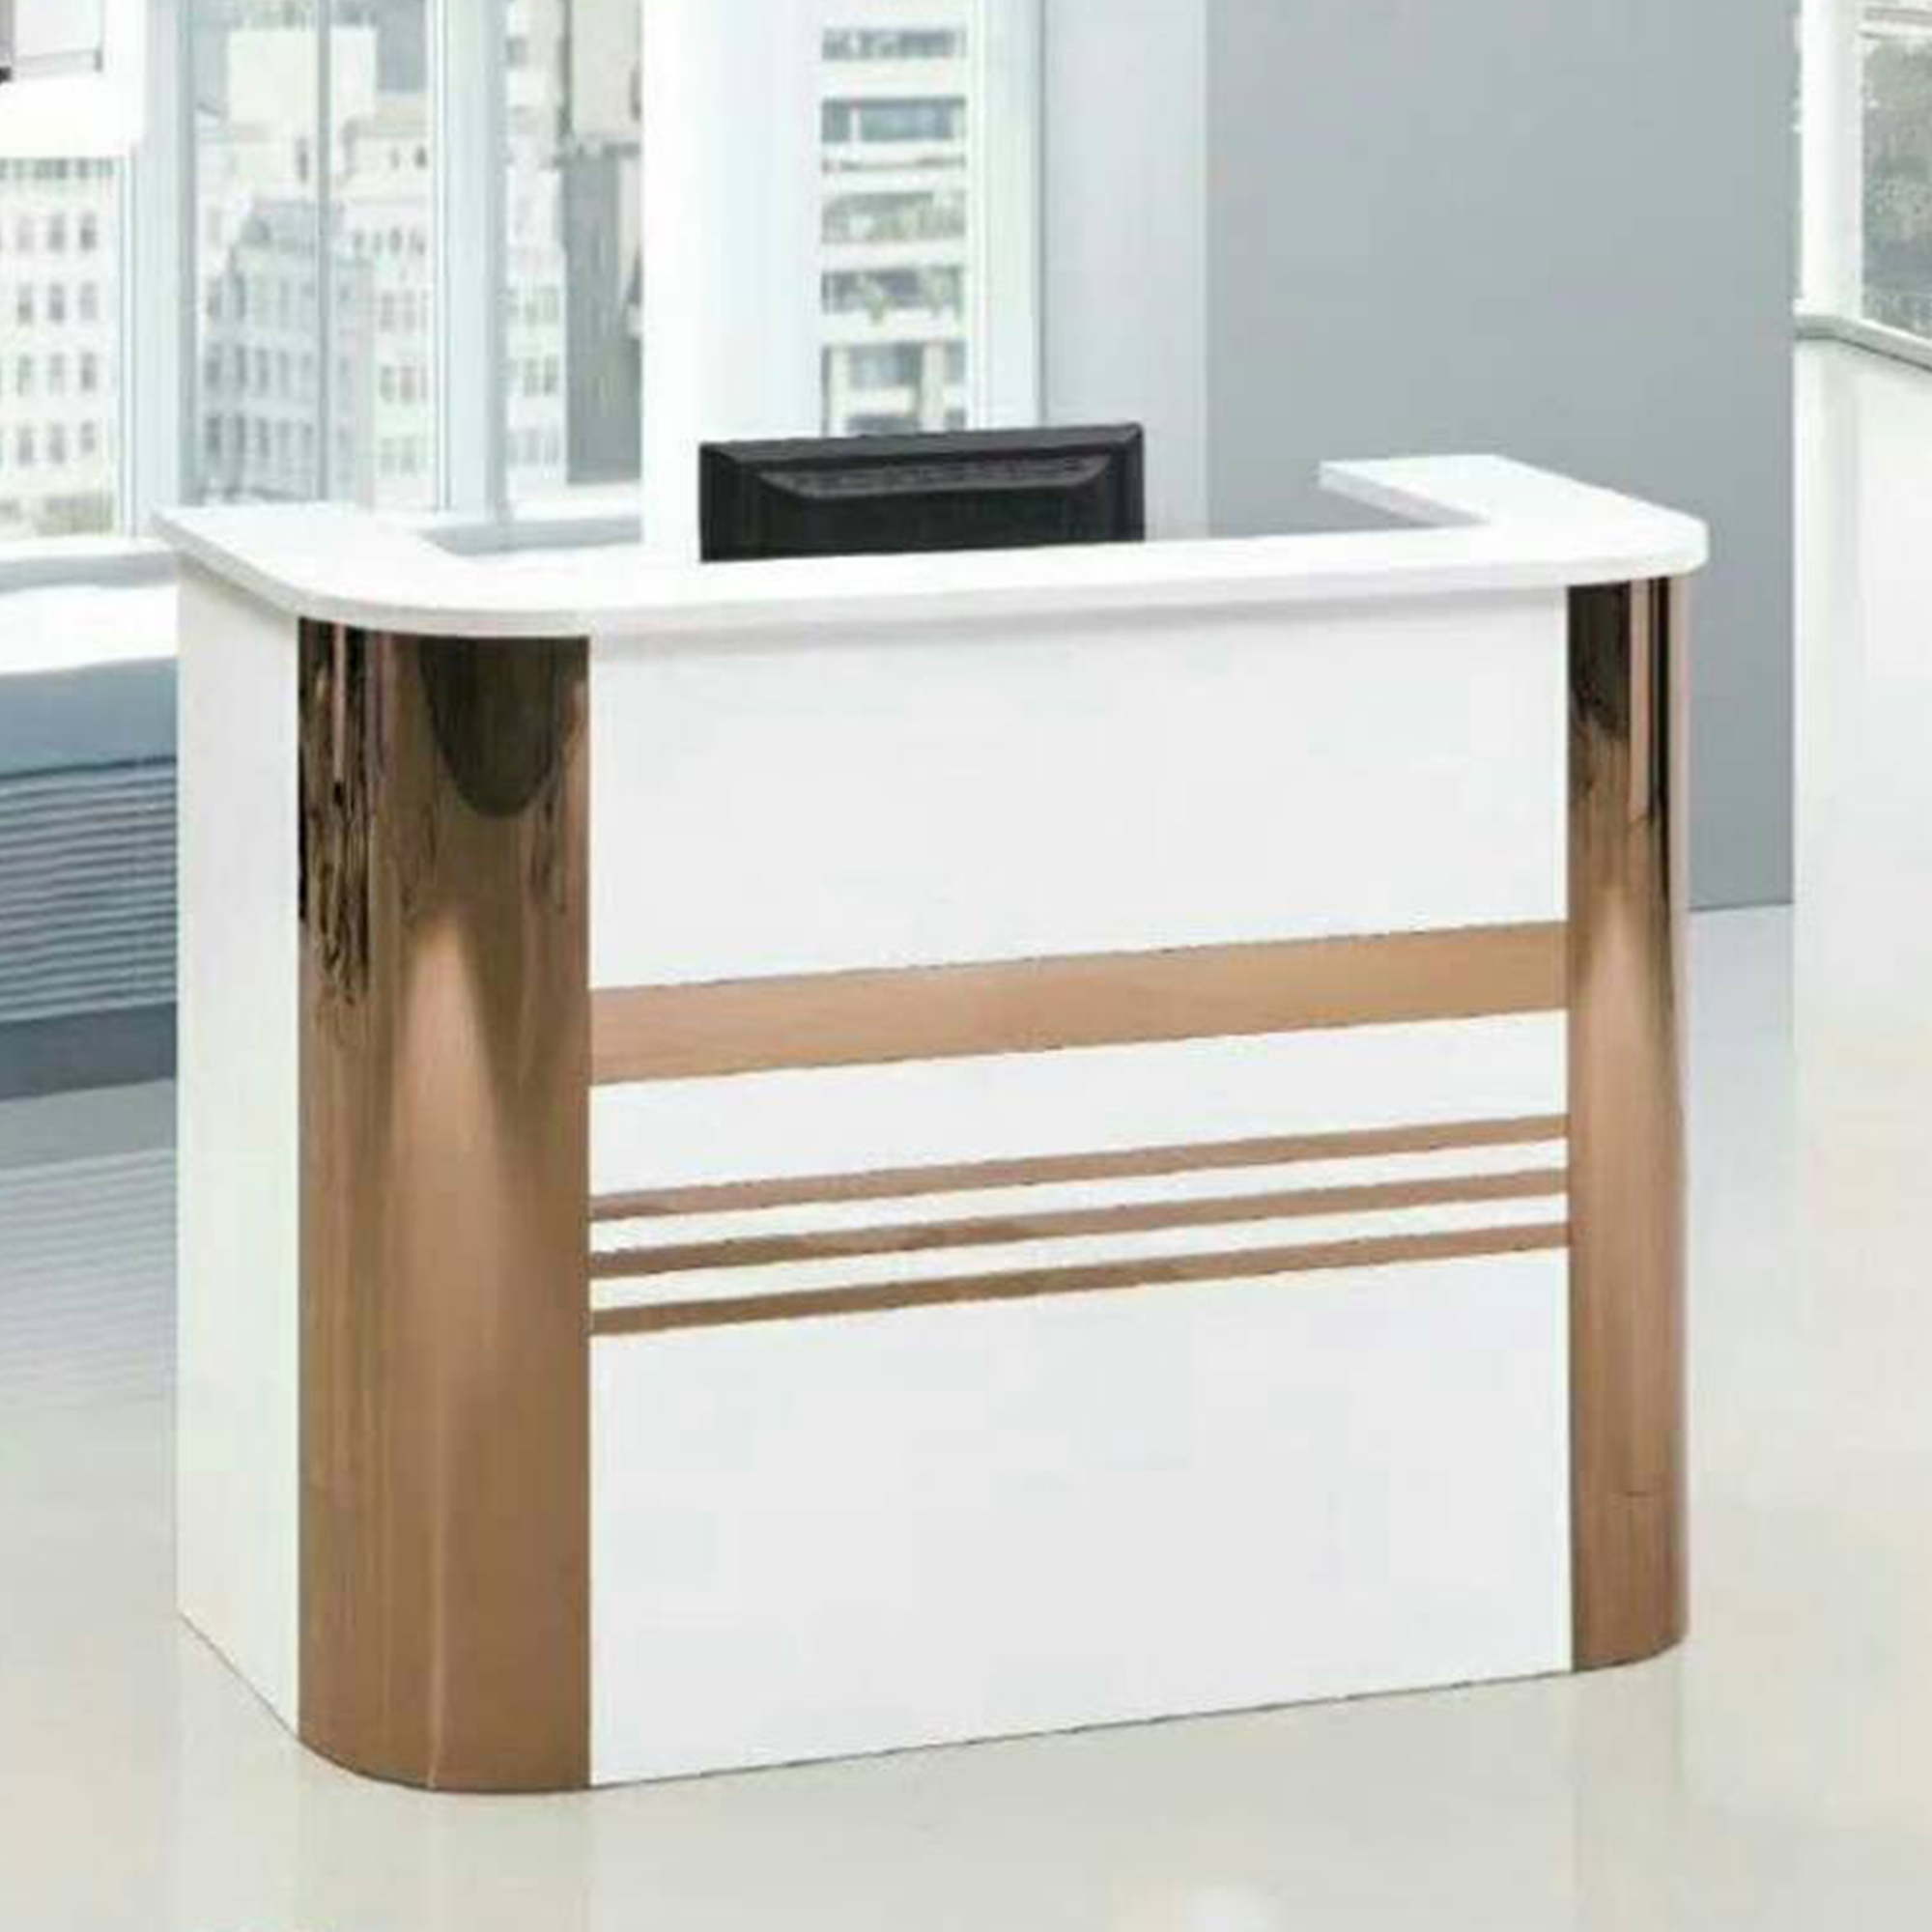 White Reception Desk With Gold Features Home Office Garden | HOG-Home Office Garden | HOG-Home Office Garden